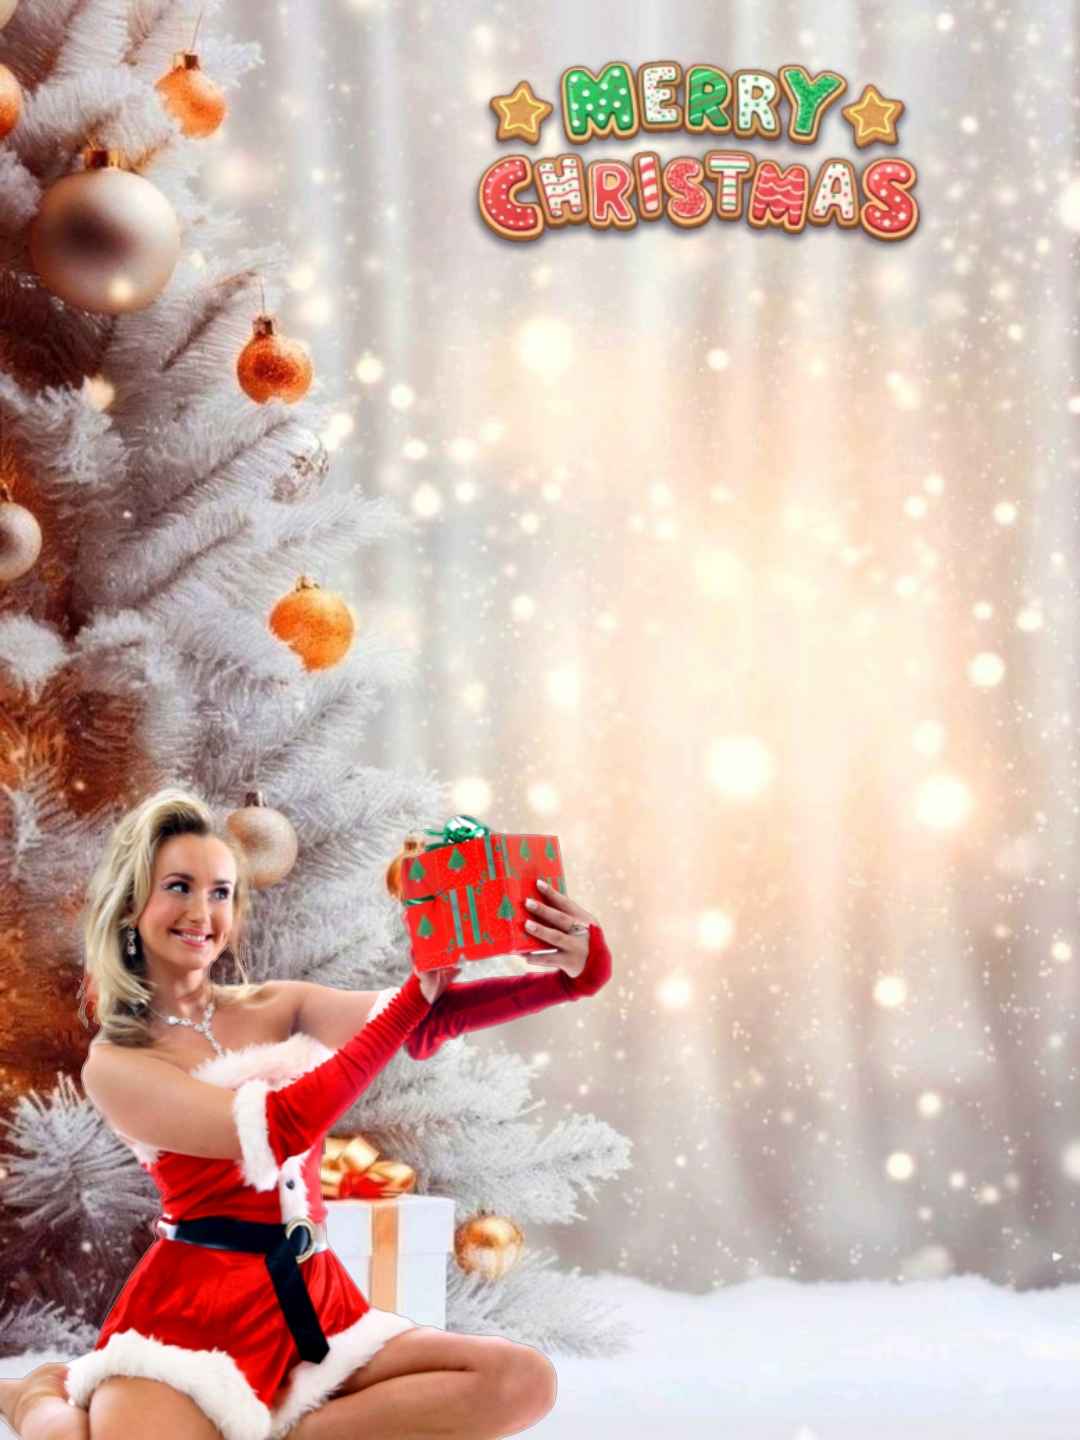 Merry Christmas Girl Hd Editing Background Download